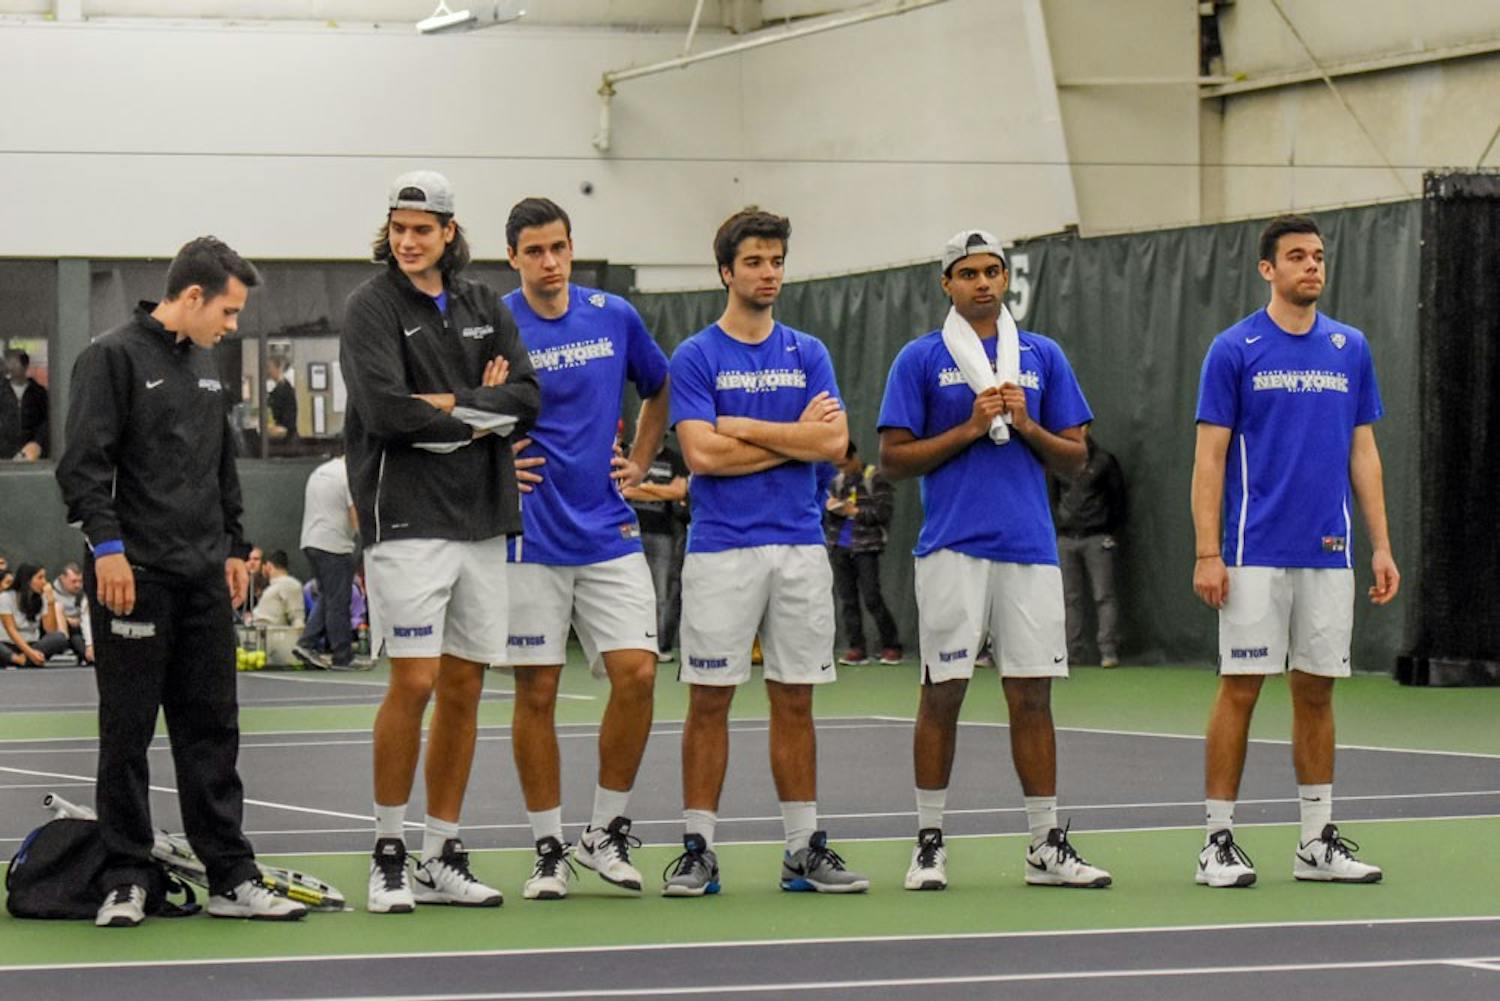 (Third in from left to right) The men’s tennis team’s seniors Amar Hromic, Pablo Alvarez and Akil Mehta, as well as Sergio Arevailillo (not pictured), had their UB careers come to an end on Friday with the Bulls’ season-ending loss in the Mid-American Conference Championships Semifinals.